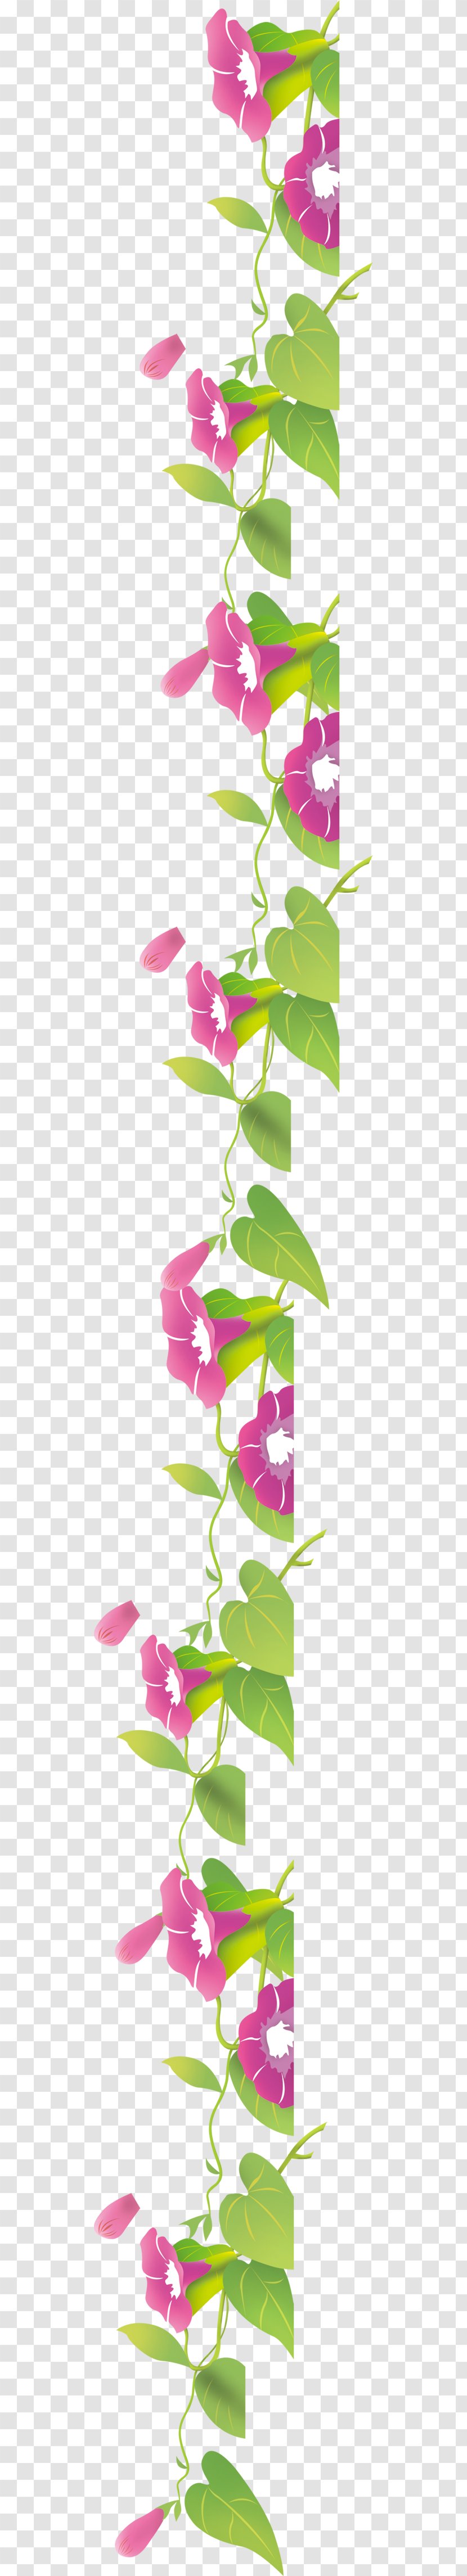 Purple Qixi Festival Valentines Day - Ipomoea Nil - Hand-painted Petunias Transparent PNG